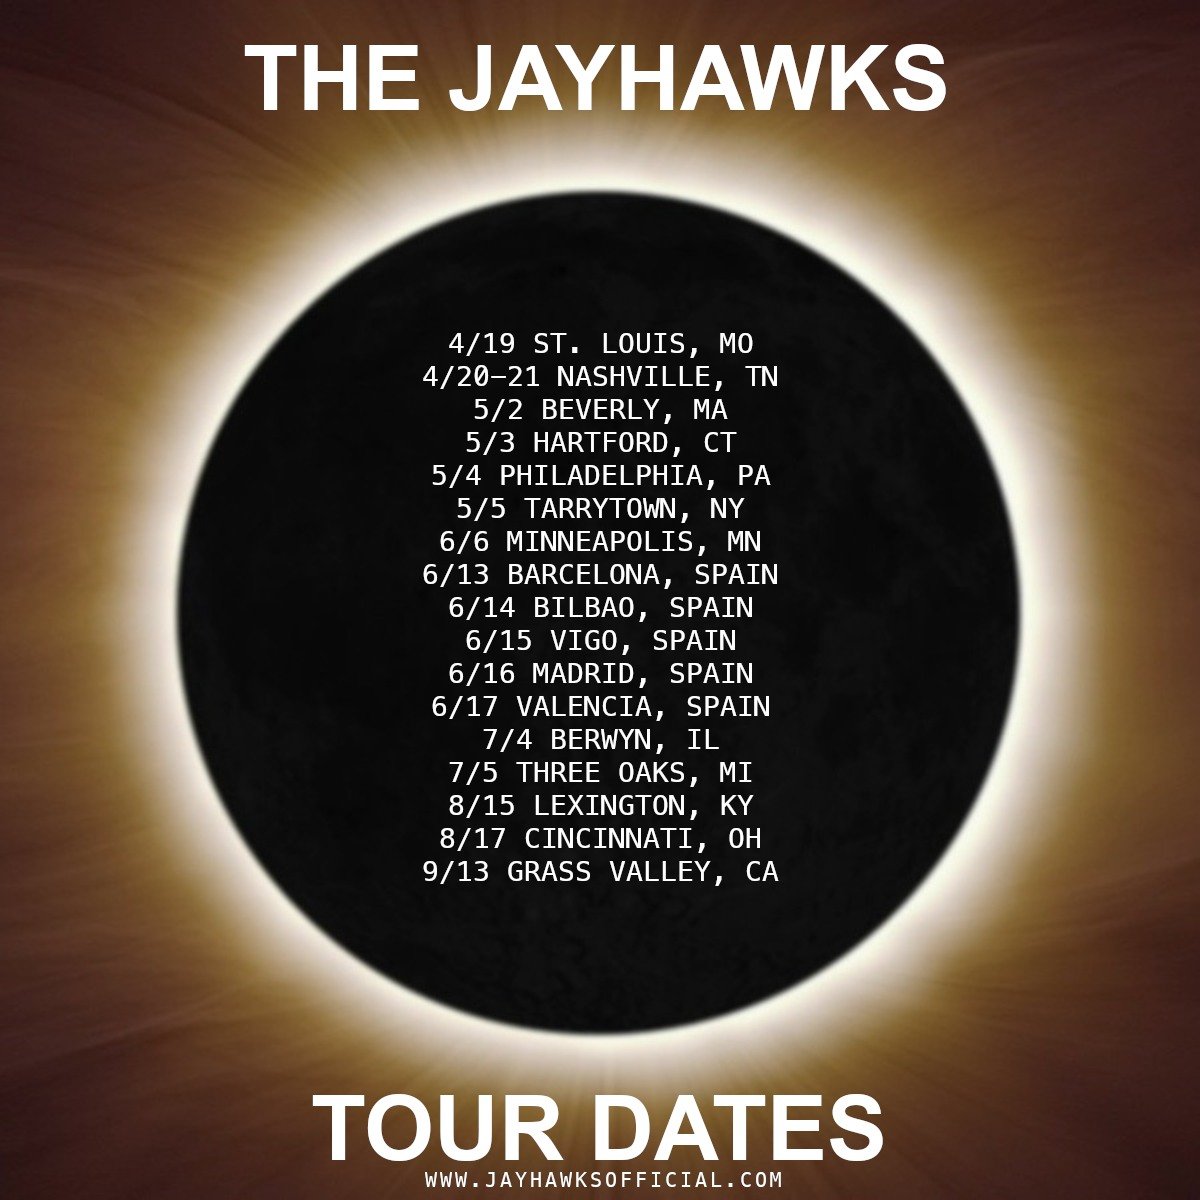 The Jayhawks (@thejayhawksofficial) tour schedule (as of 4/10).

The latest tour dates can always be found on The Jayhawks website: via the Flowpage link in the bio.

4/19 - St. Louis, MO - Sheldon Concert Hall (sold out)
4/20 - Nashville, TN - City 